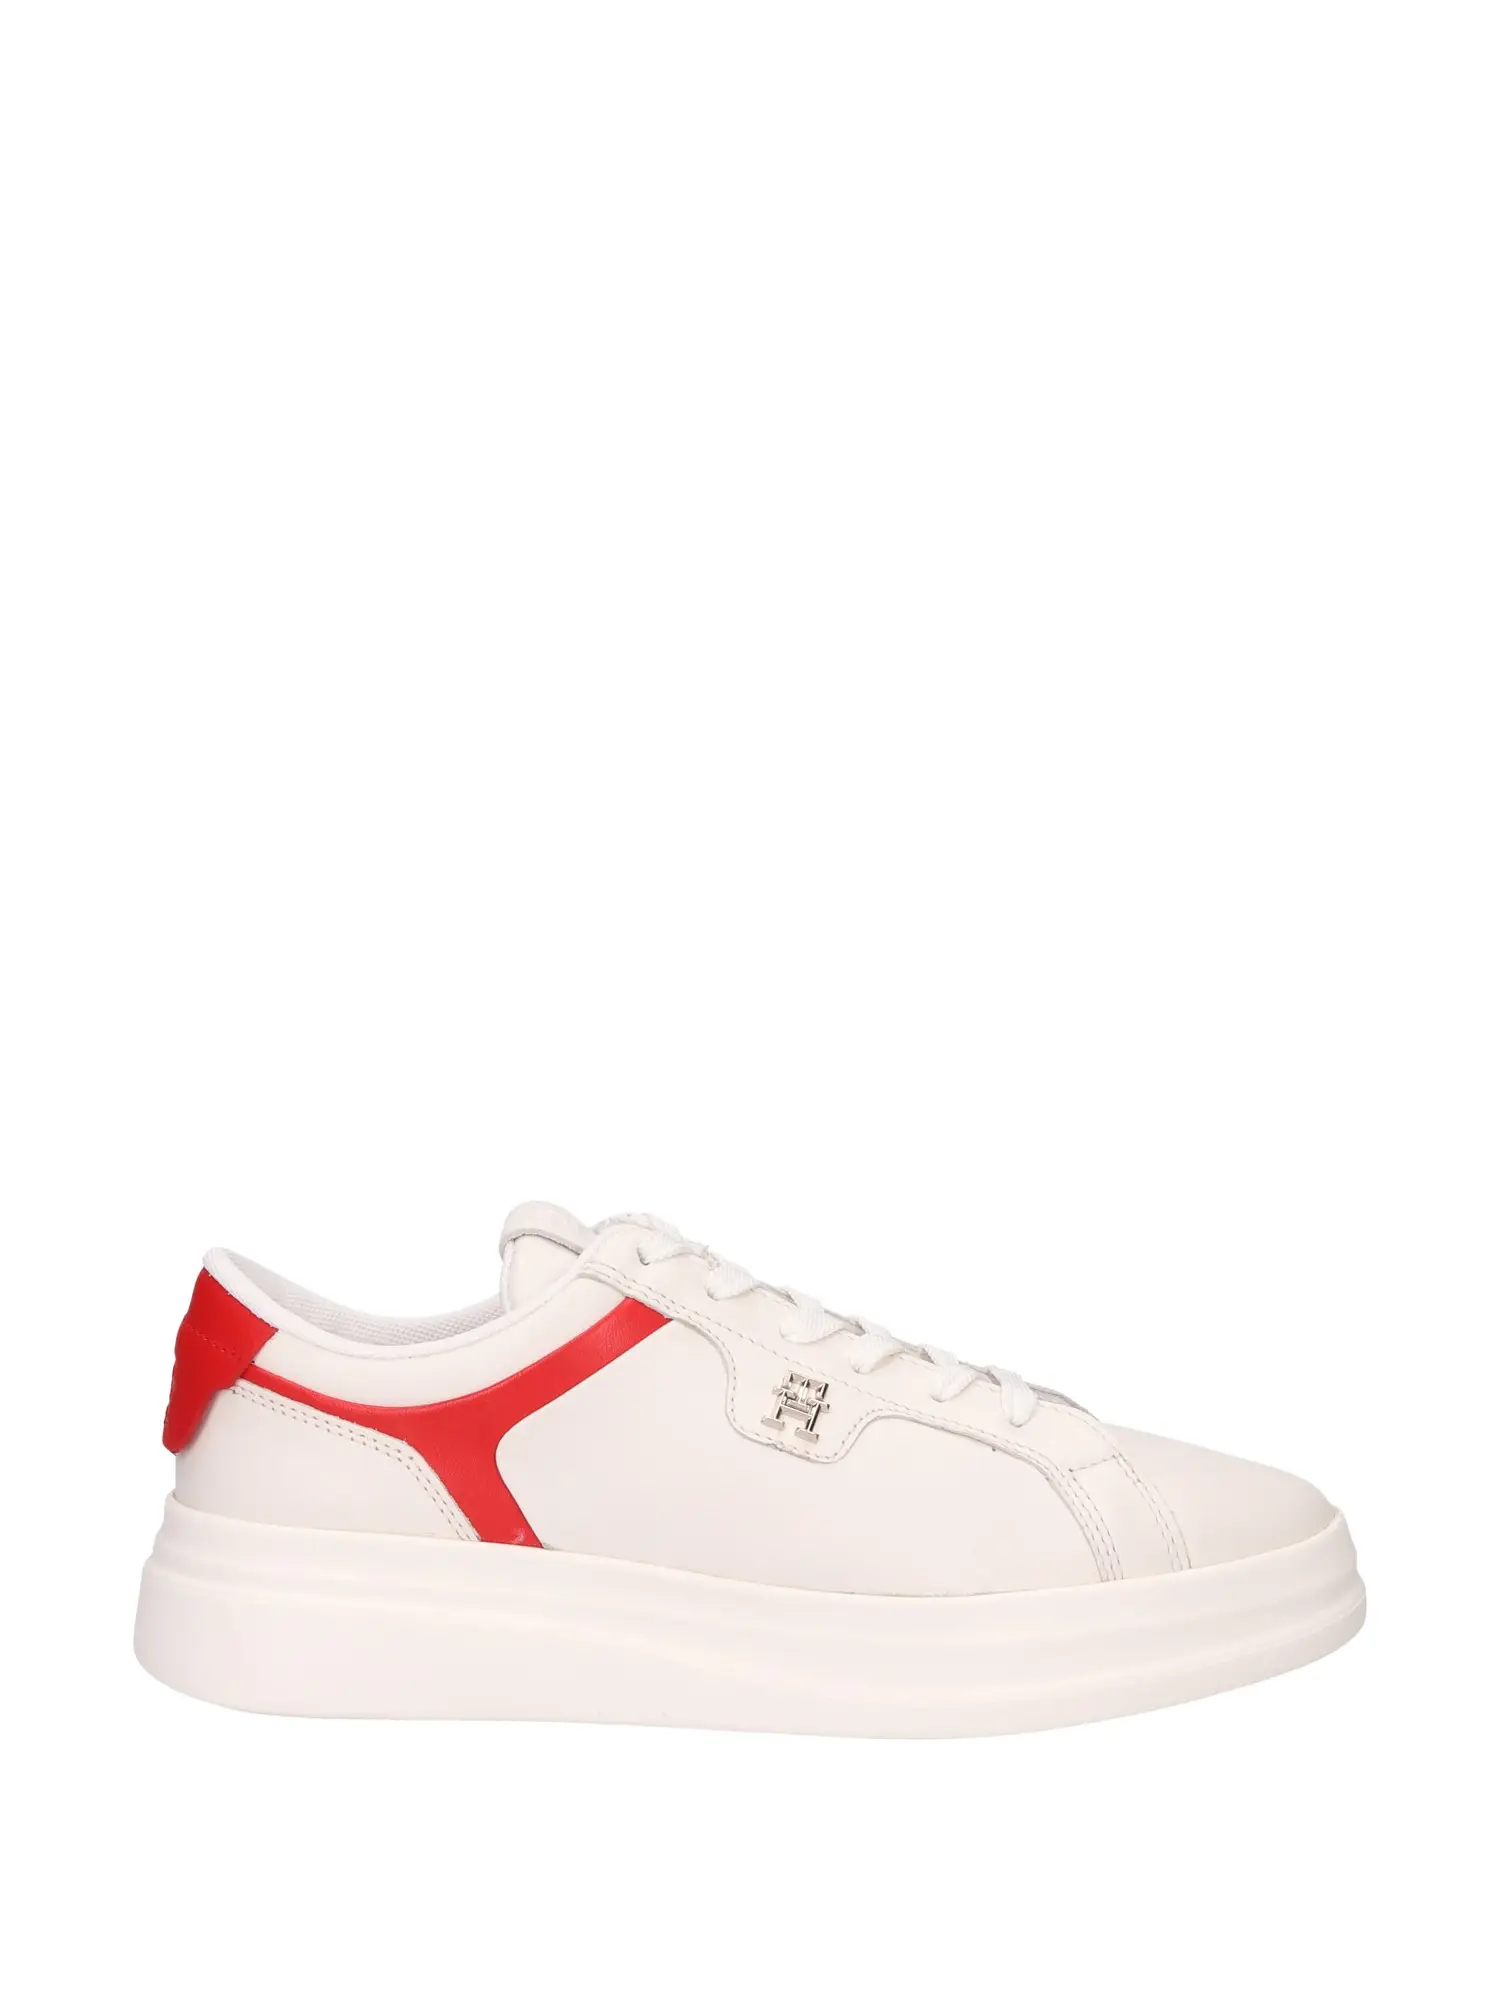 SNEAKERS DONNA - TOMMY HILFIGER - FW0FW07460 - ECRU/ROSSO, 37